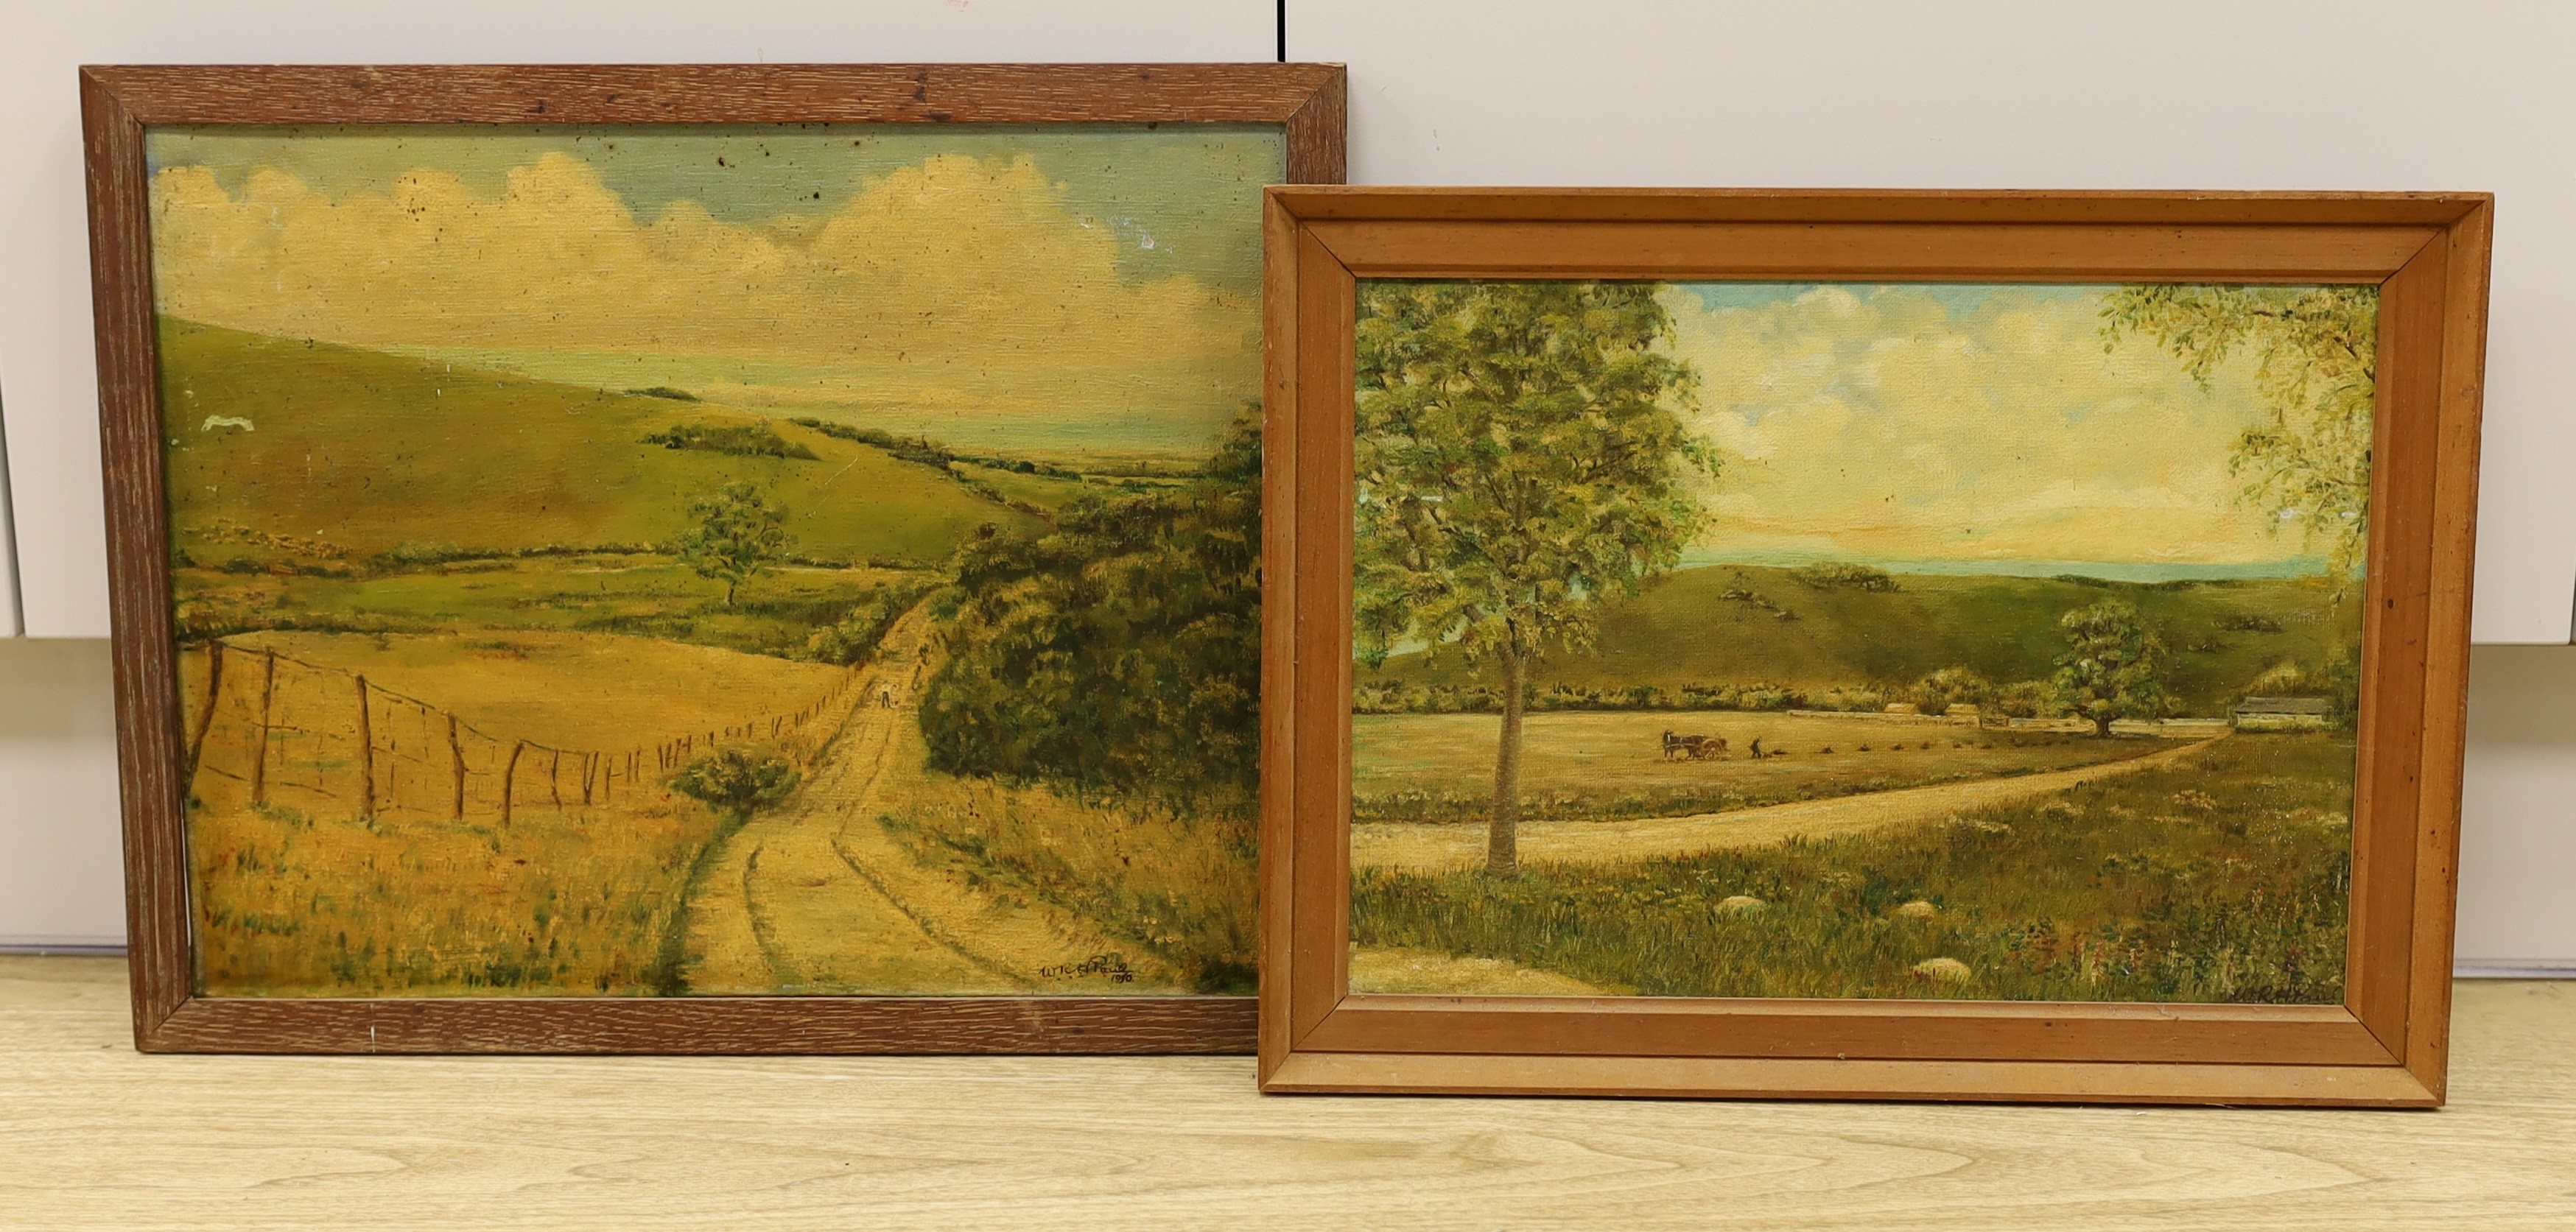 W.R.H Paul, two oils on canvas, Eastbourne, 'The Piggery Green Street Farm' and 'Path to Jevington', signed and dated c.1950, largest 34 x 42cm